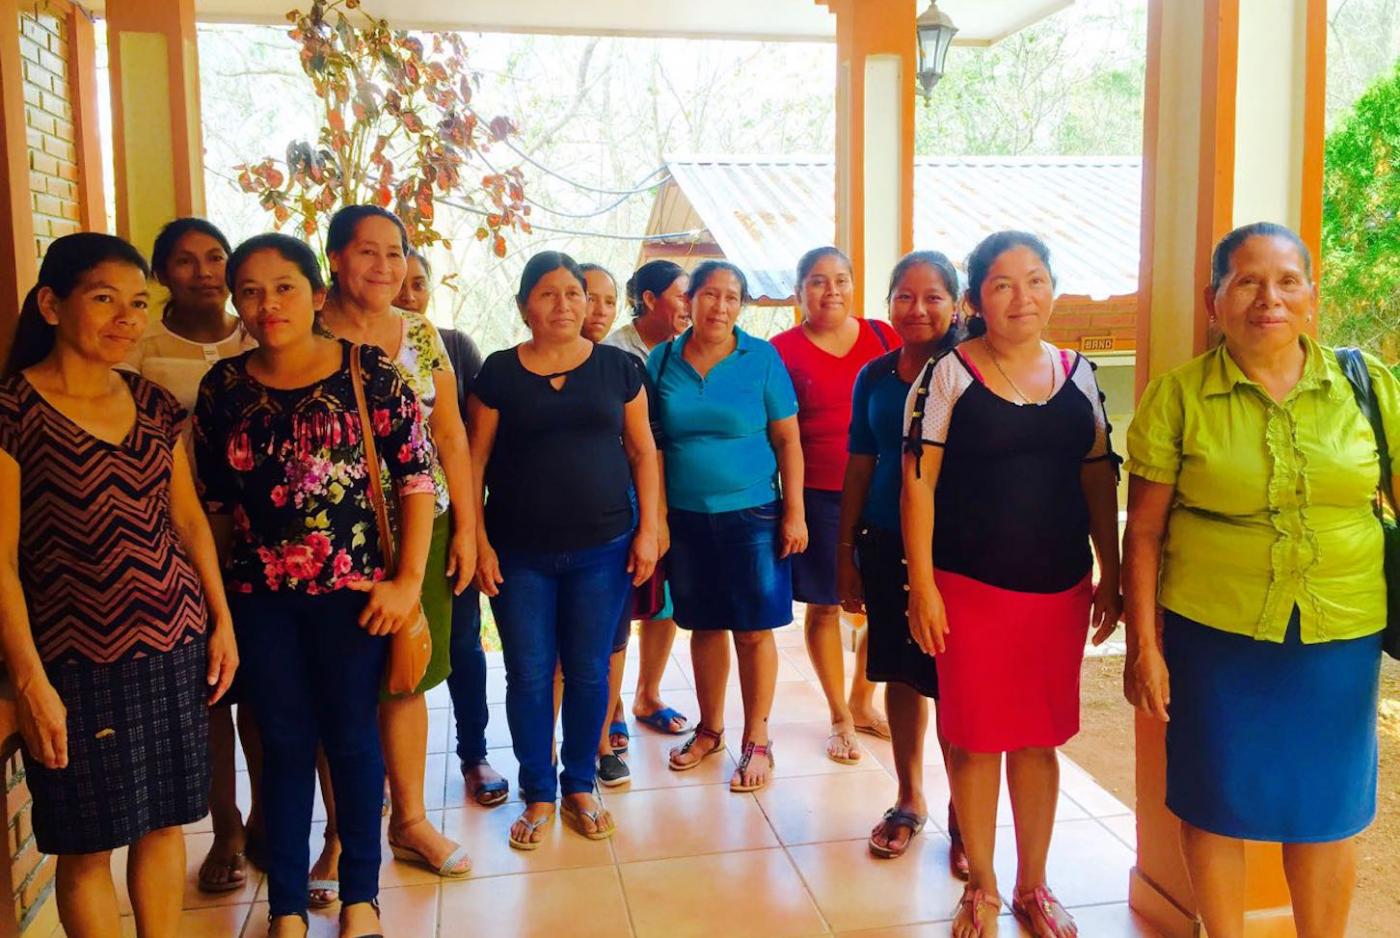 In Copan, Honduras, women gathered to help initiate a region-wide program to promote access to justice and women&#039;s rights.